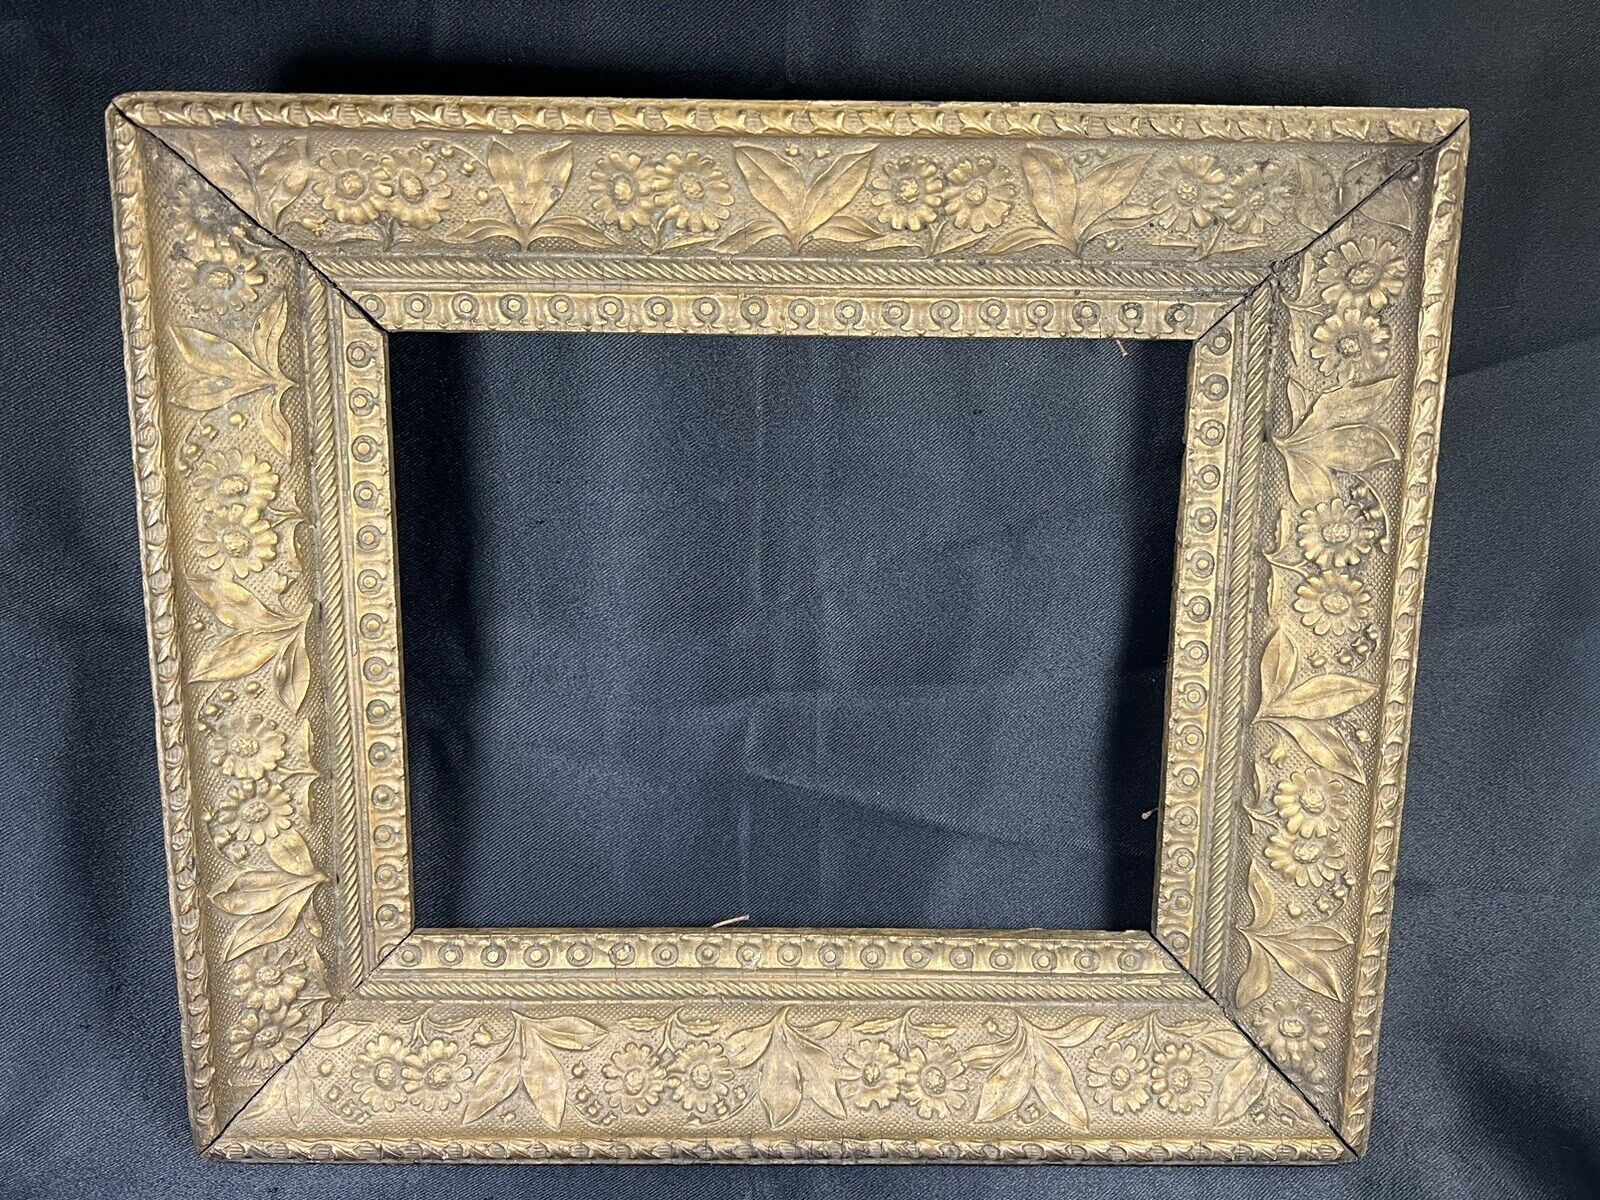 VTG Antique Ornate Gold Gilded Wood Picture 14.5x12.5” Holds 8x10” gesso